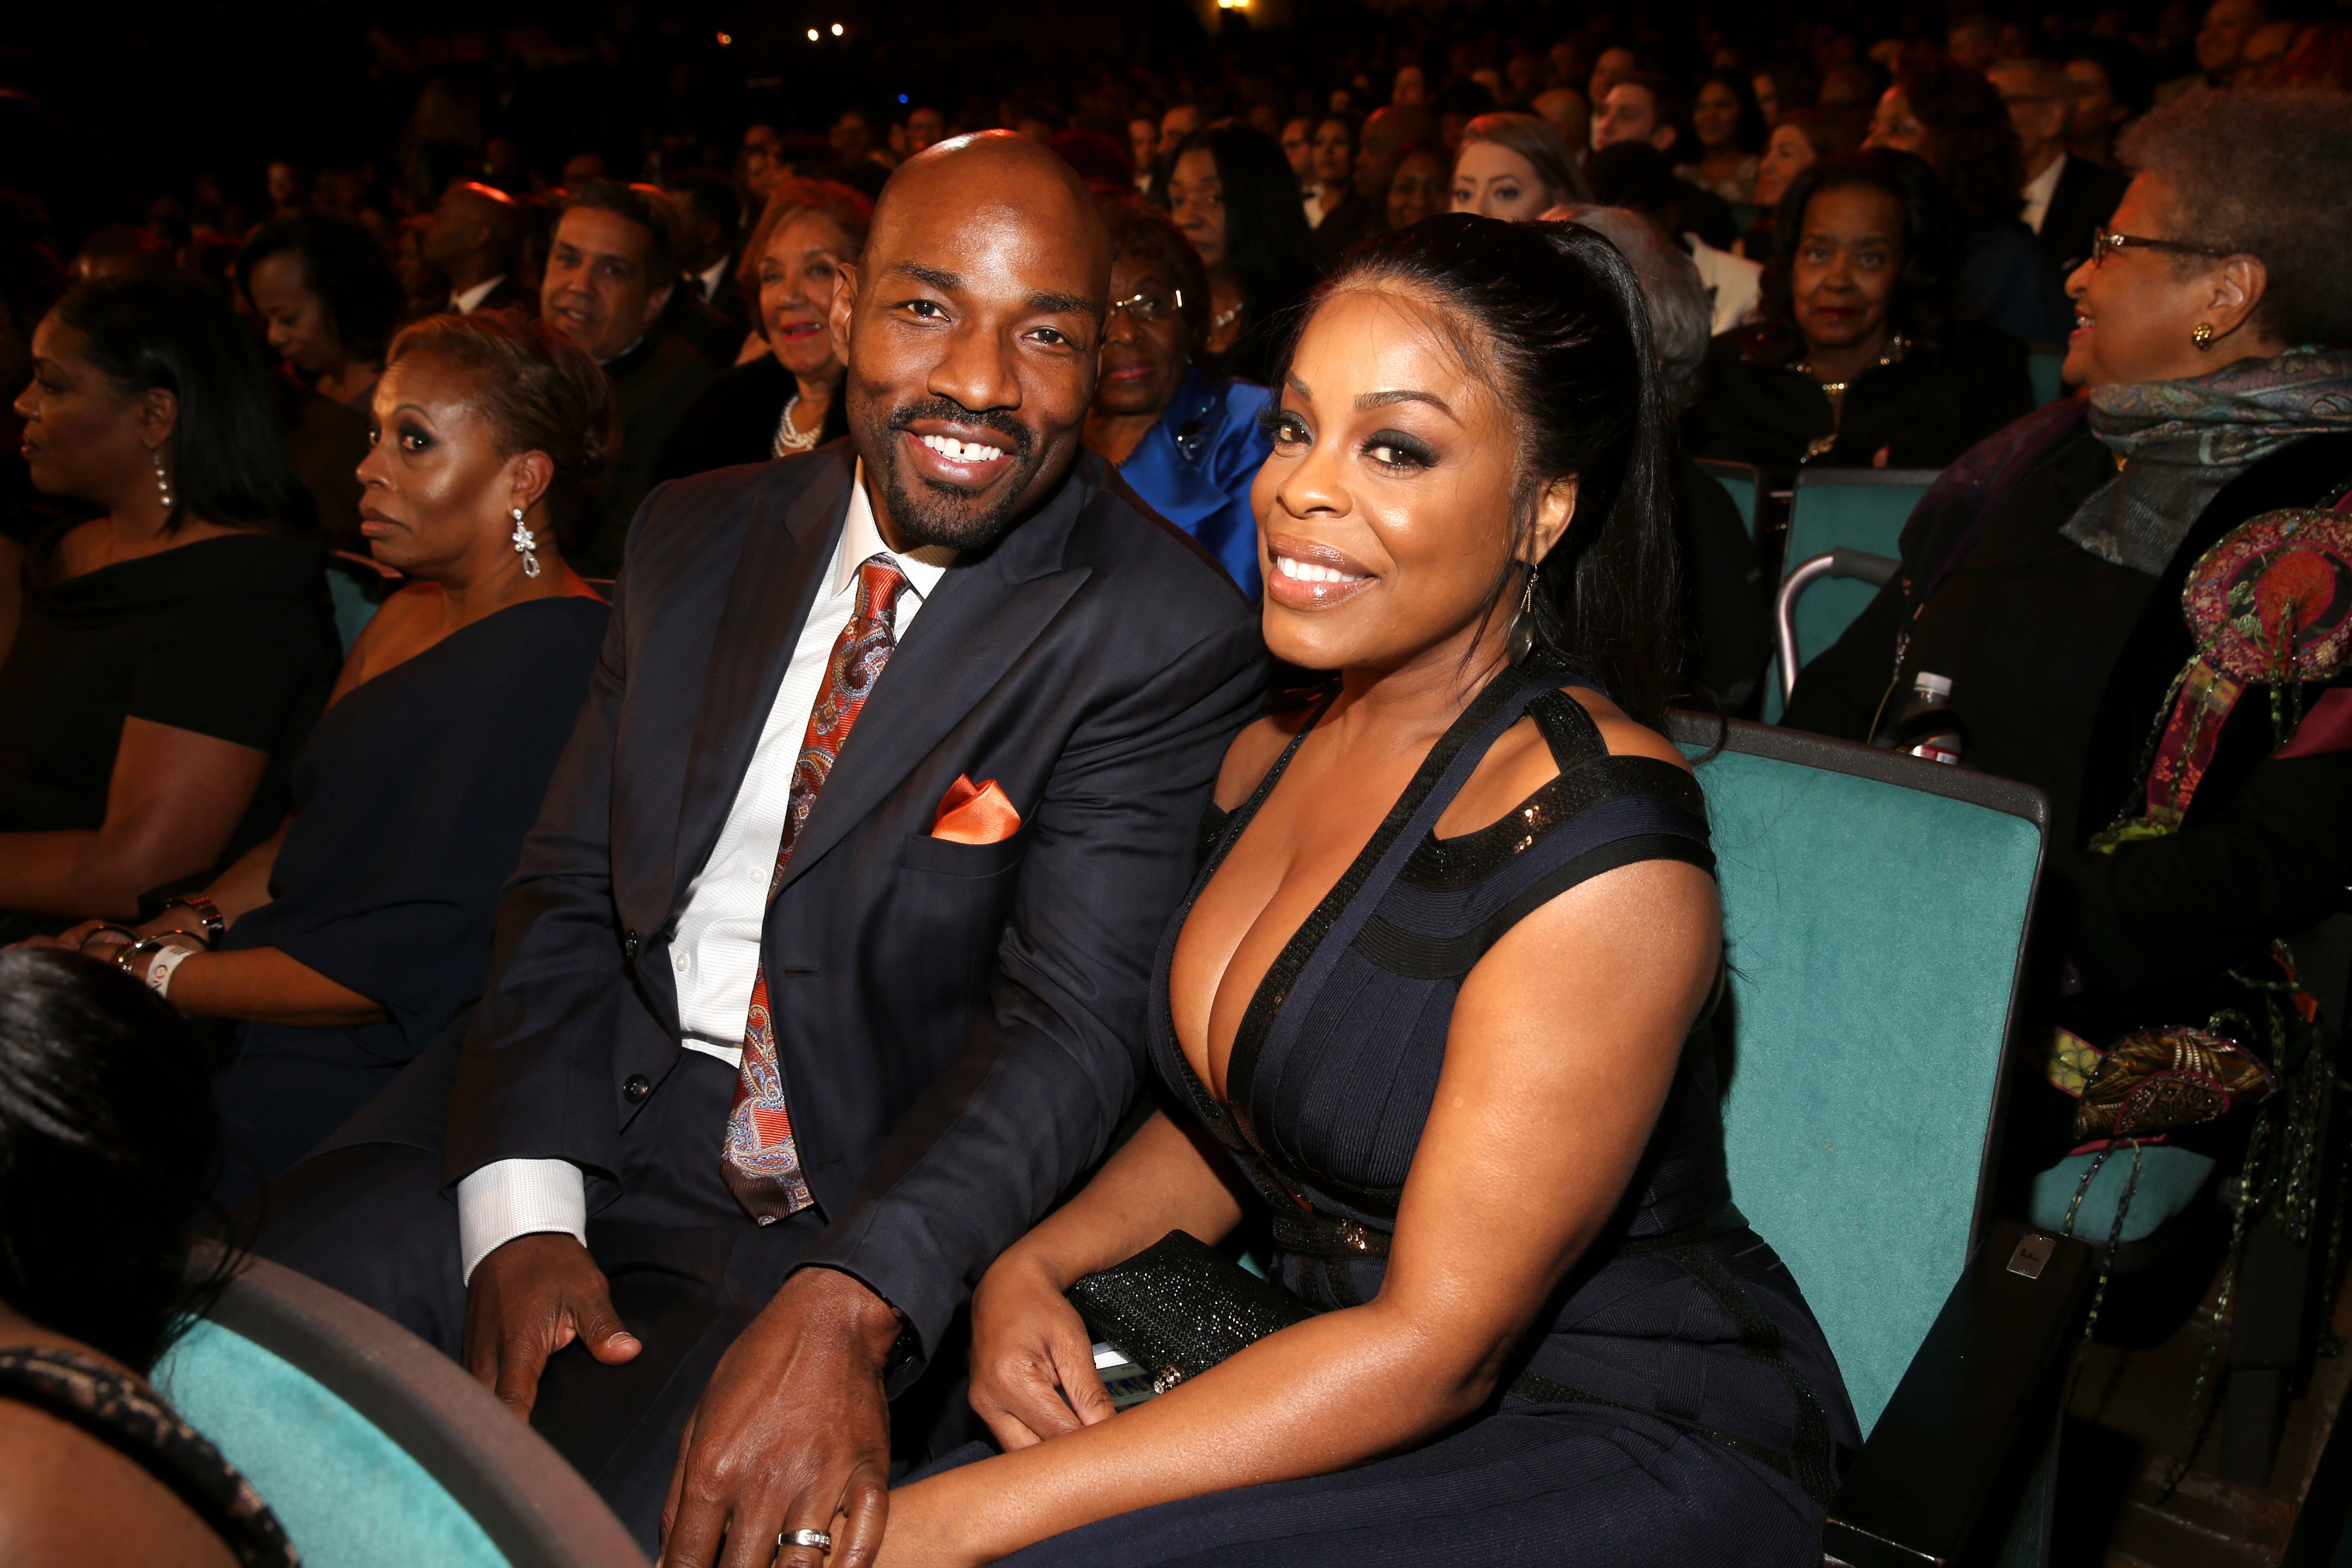 Niecy Nash: It Was 'Very Important To Show My Children What Real Love Is' When They Met Their Stepdad-To-Be
